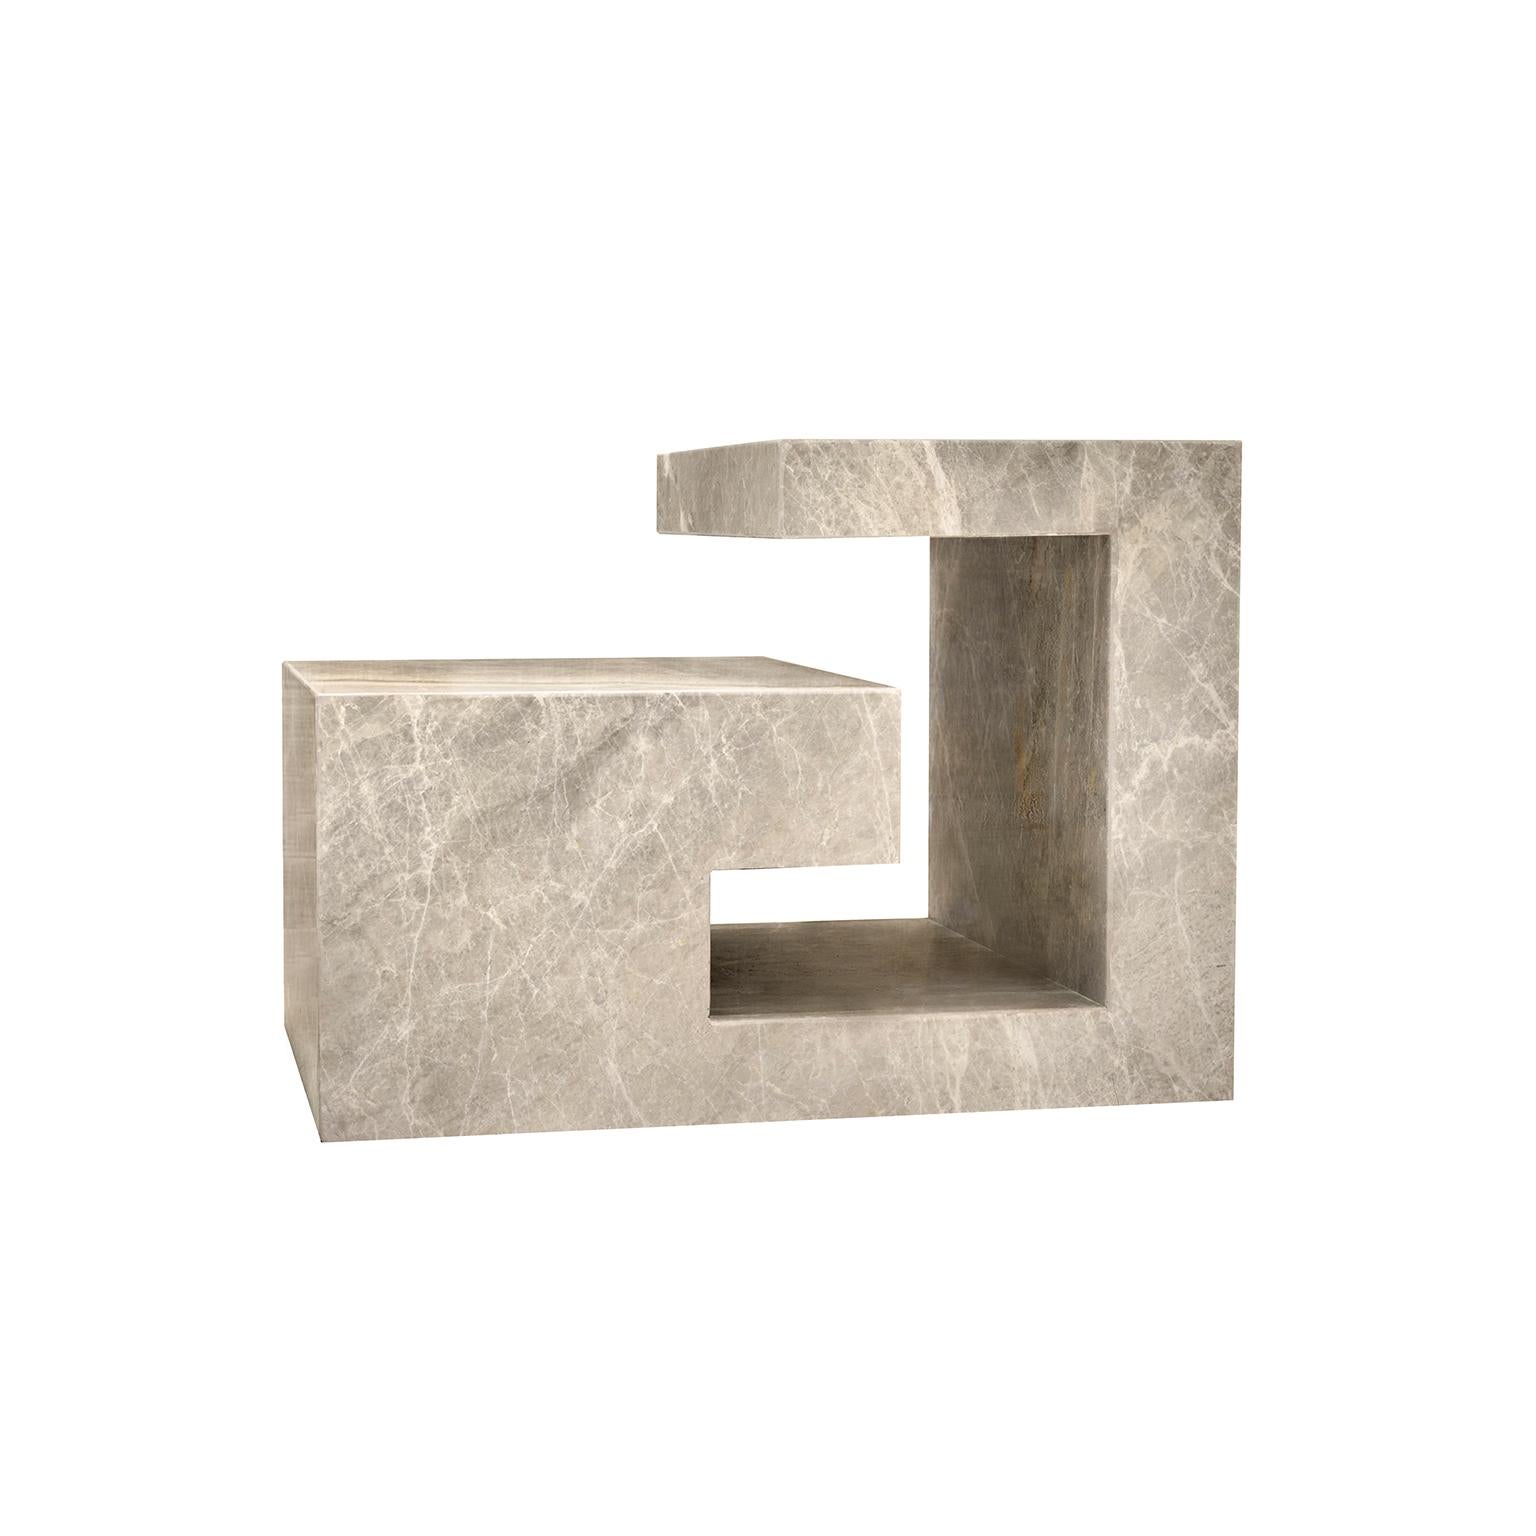 Solid marble, sculptural table model “Philos” shaped like a Greek key. The multiple surfaces allow for various uses, from serving to seating? Handcrafted in Athens, Greece.